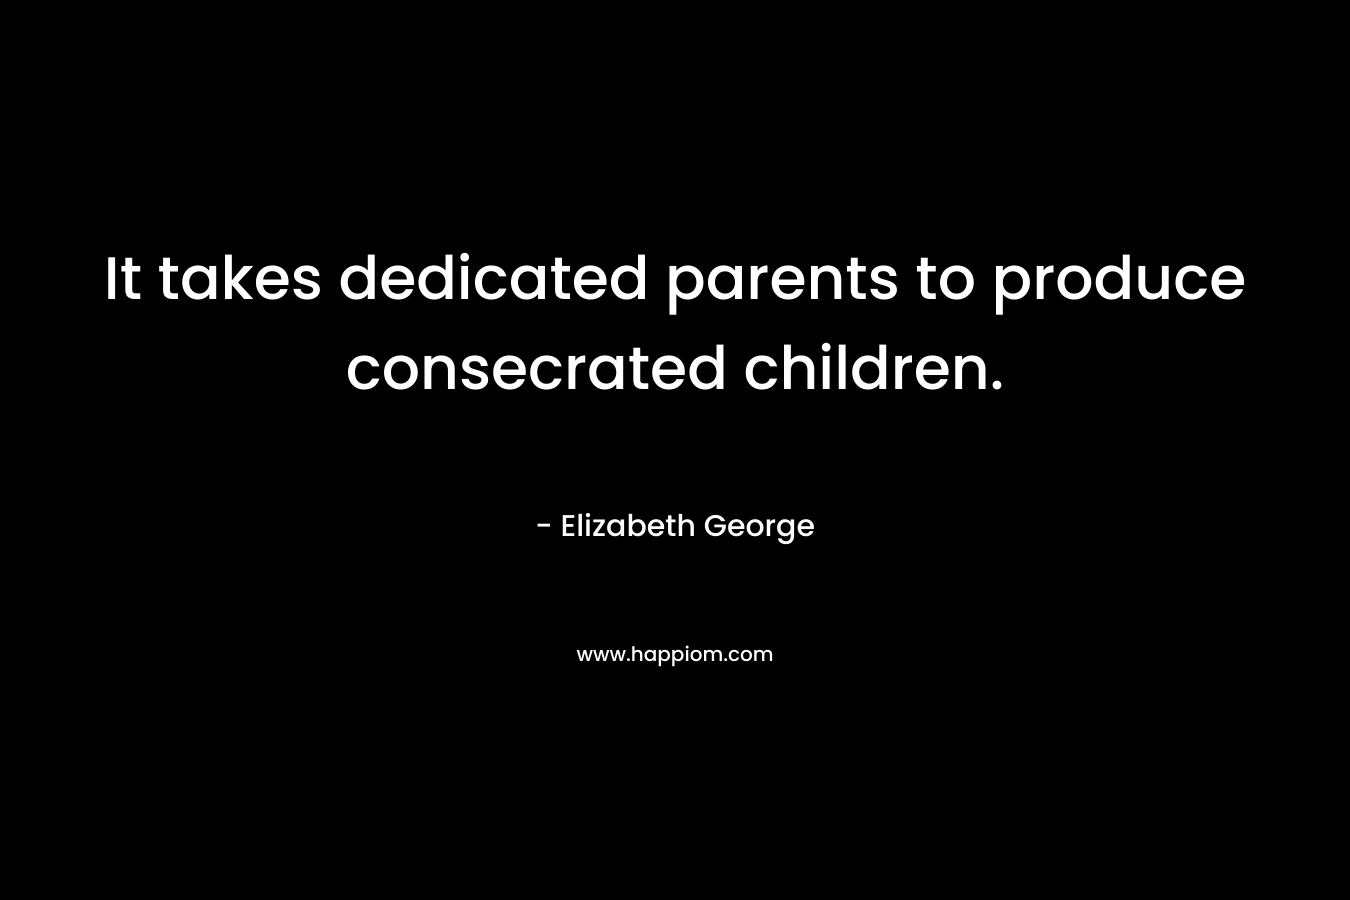 It takes dedicated parents to produce consecrated children.